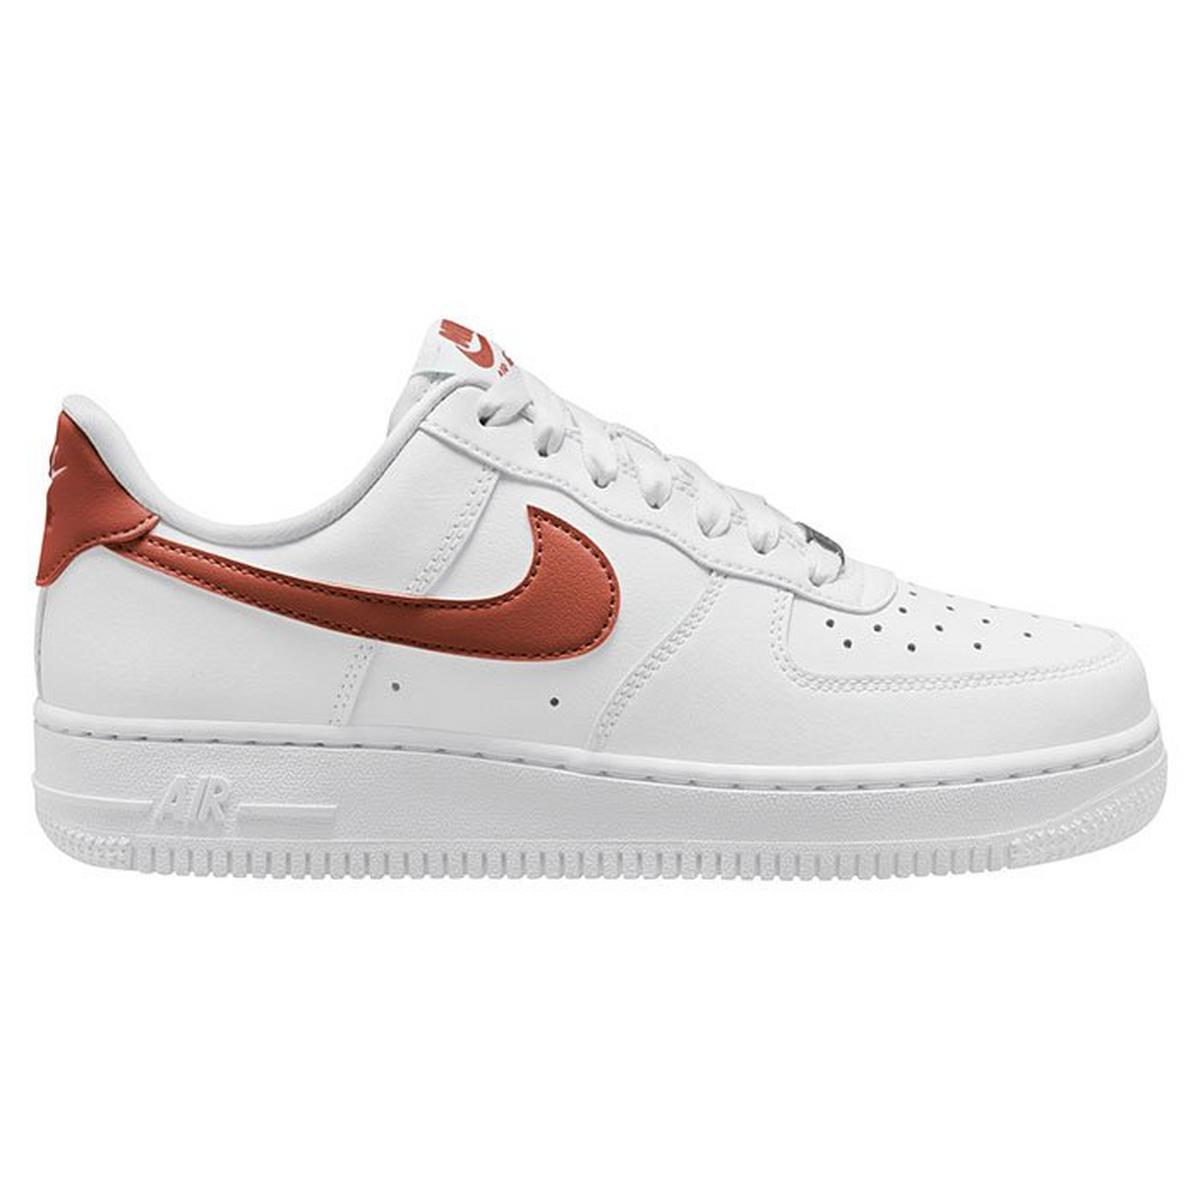 Women's Air Force 1 '07 Essential Shoe